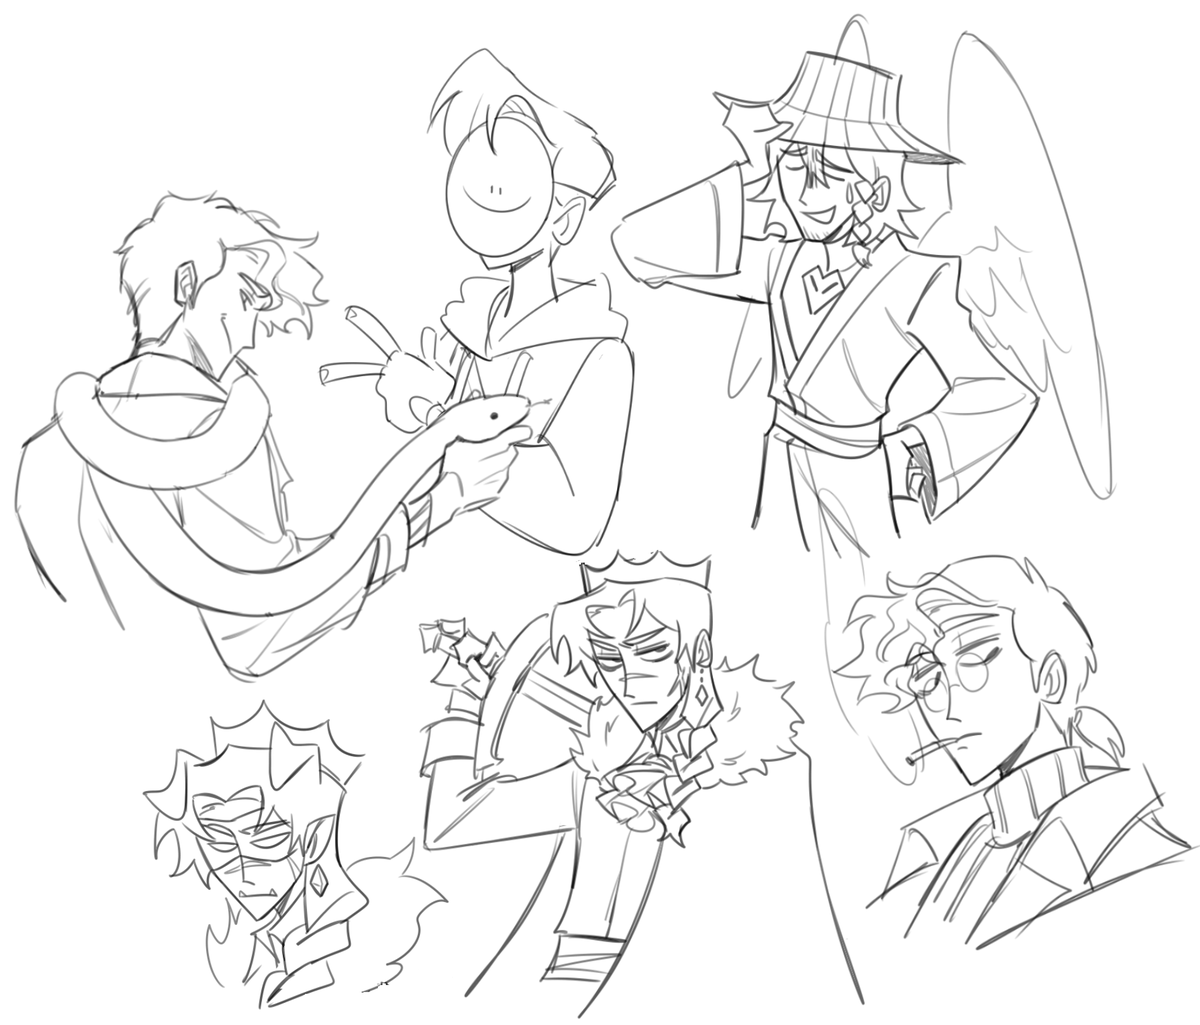 the other requested doodles from stream! 